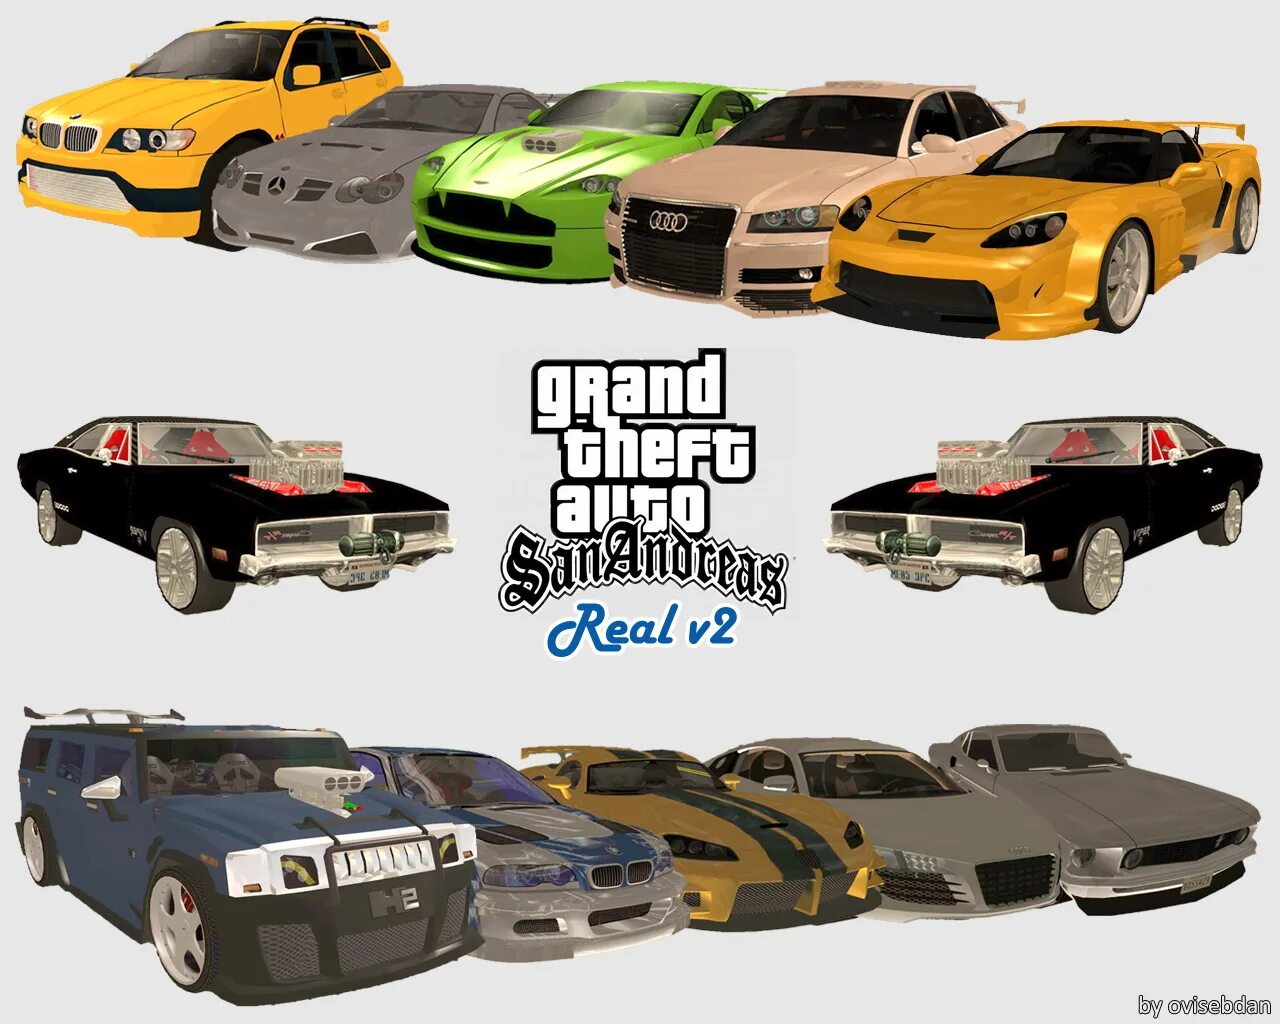 Real san andreas. ГТА Сан андреас real cars 2. Grand Theft auto San Andreas real cars 2011. ГТА Сан андреас real cars 2017. Реал кар ГТА са.